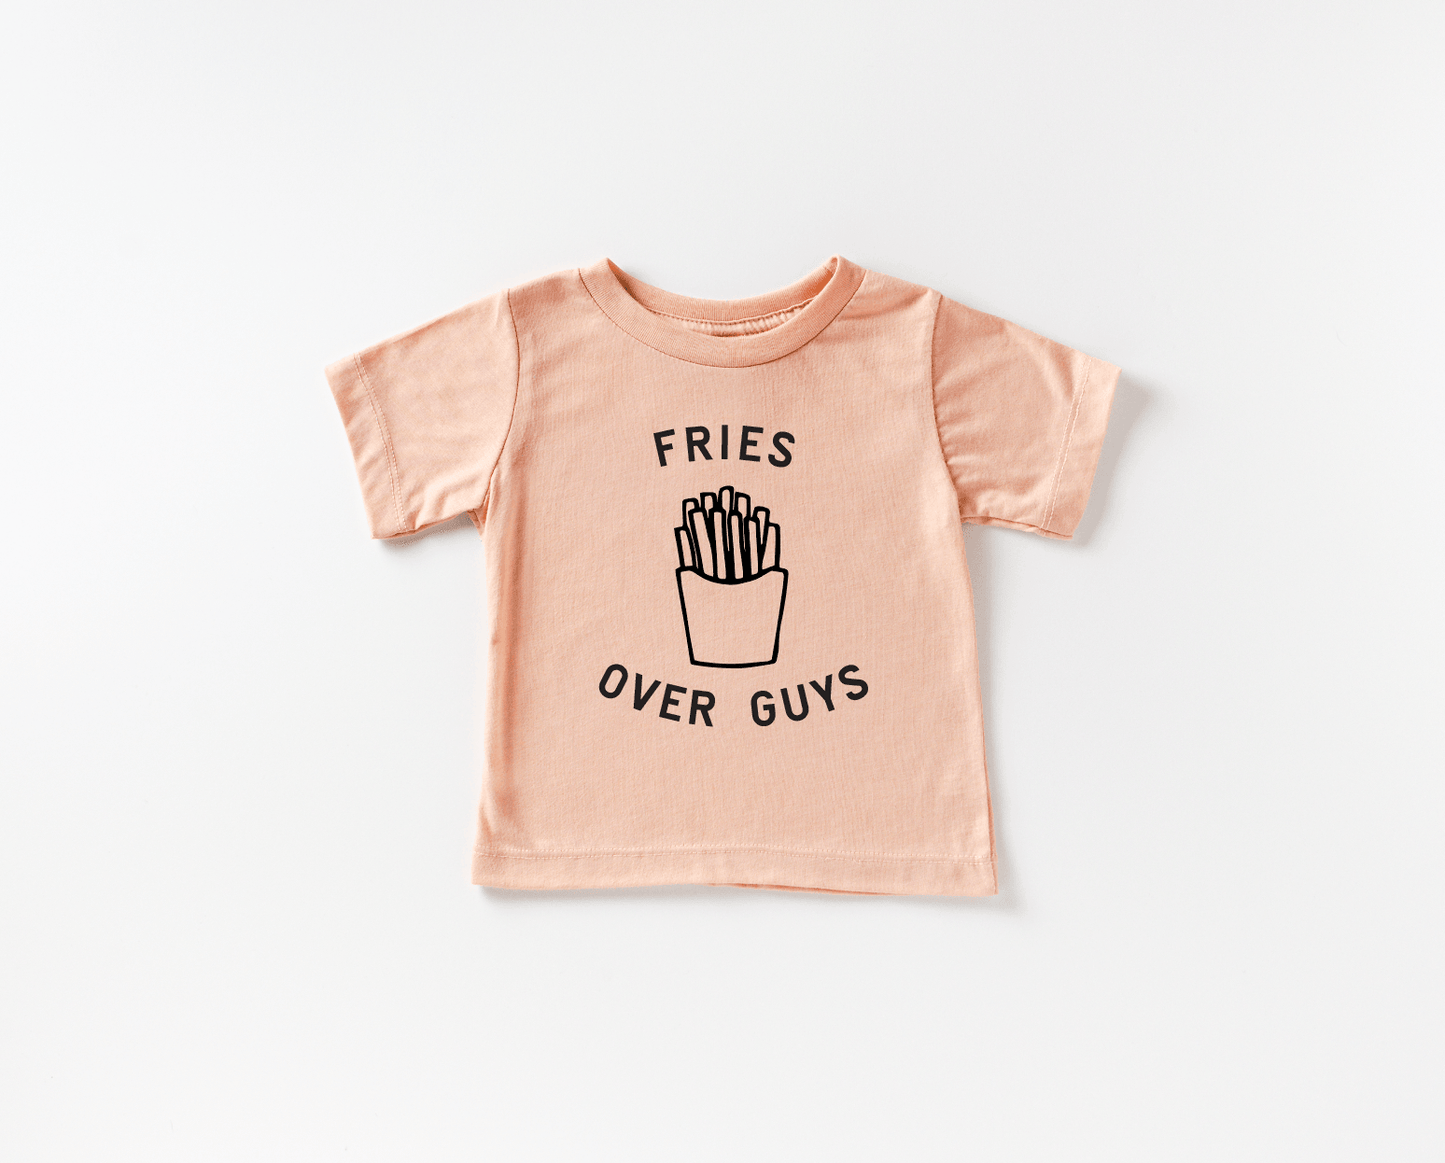 Fries Over Guys - Toddler/Baby/Youth Tee - HERS